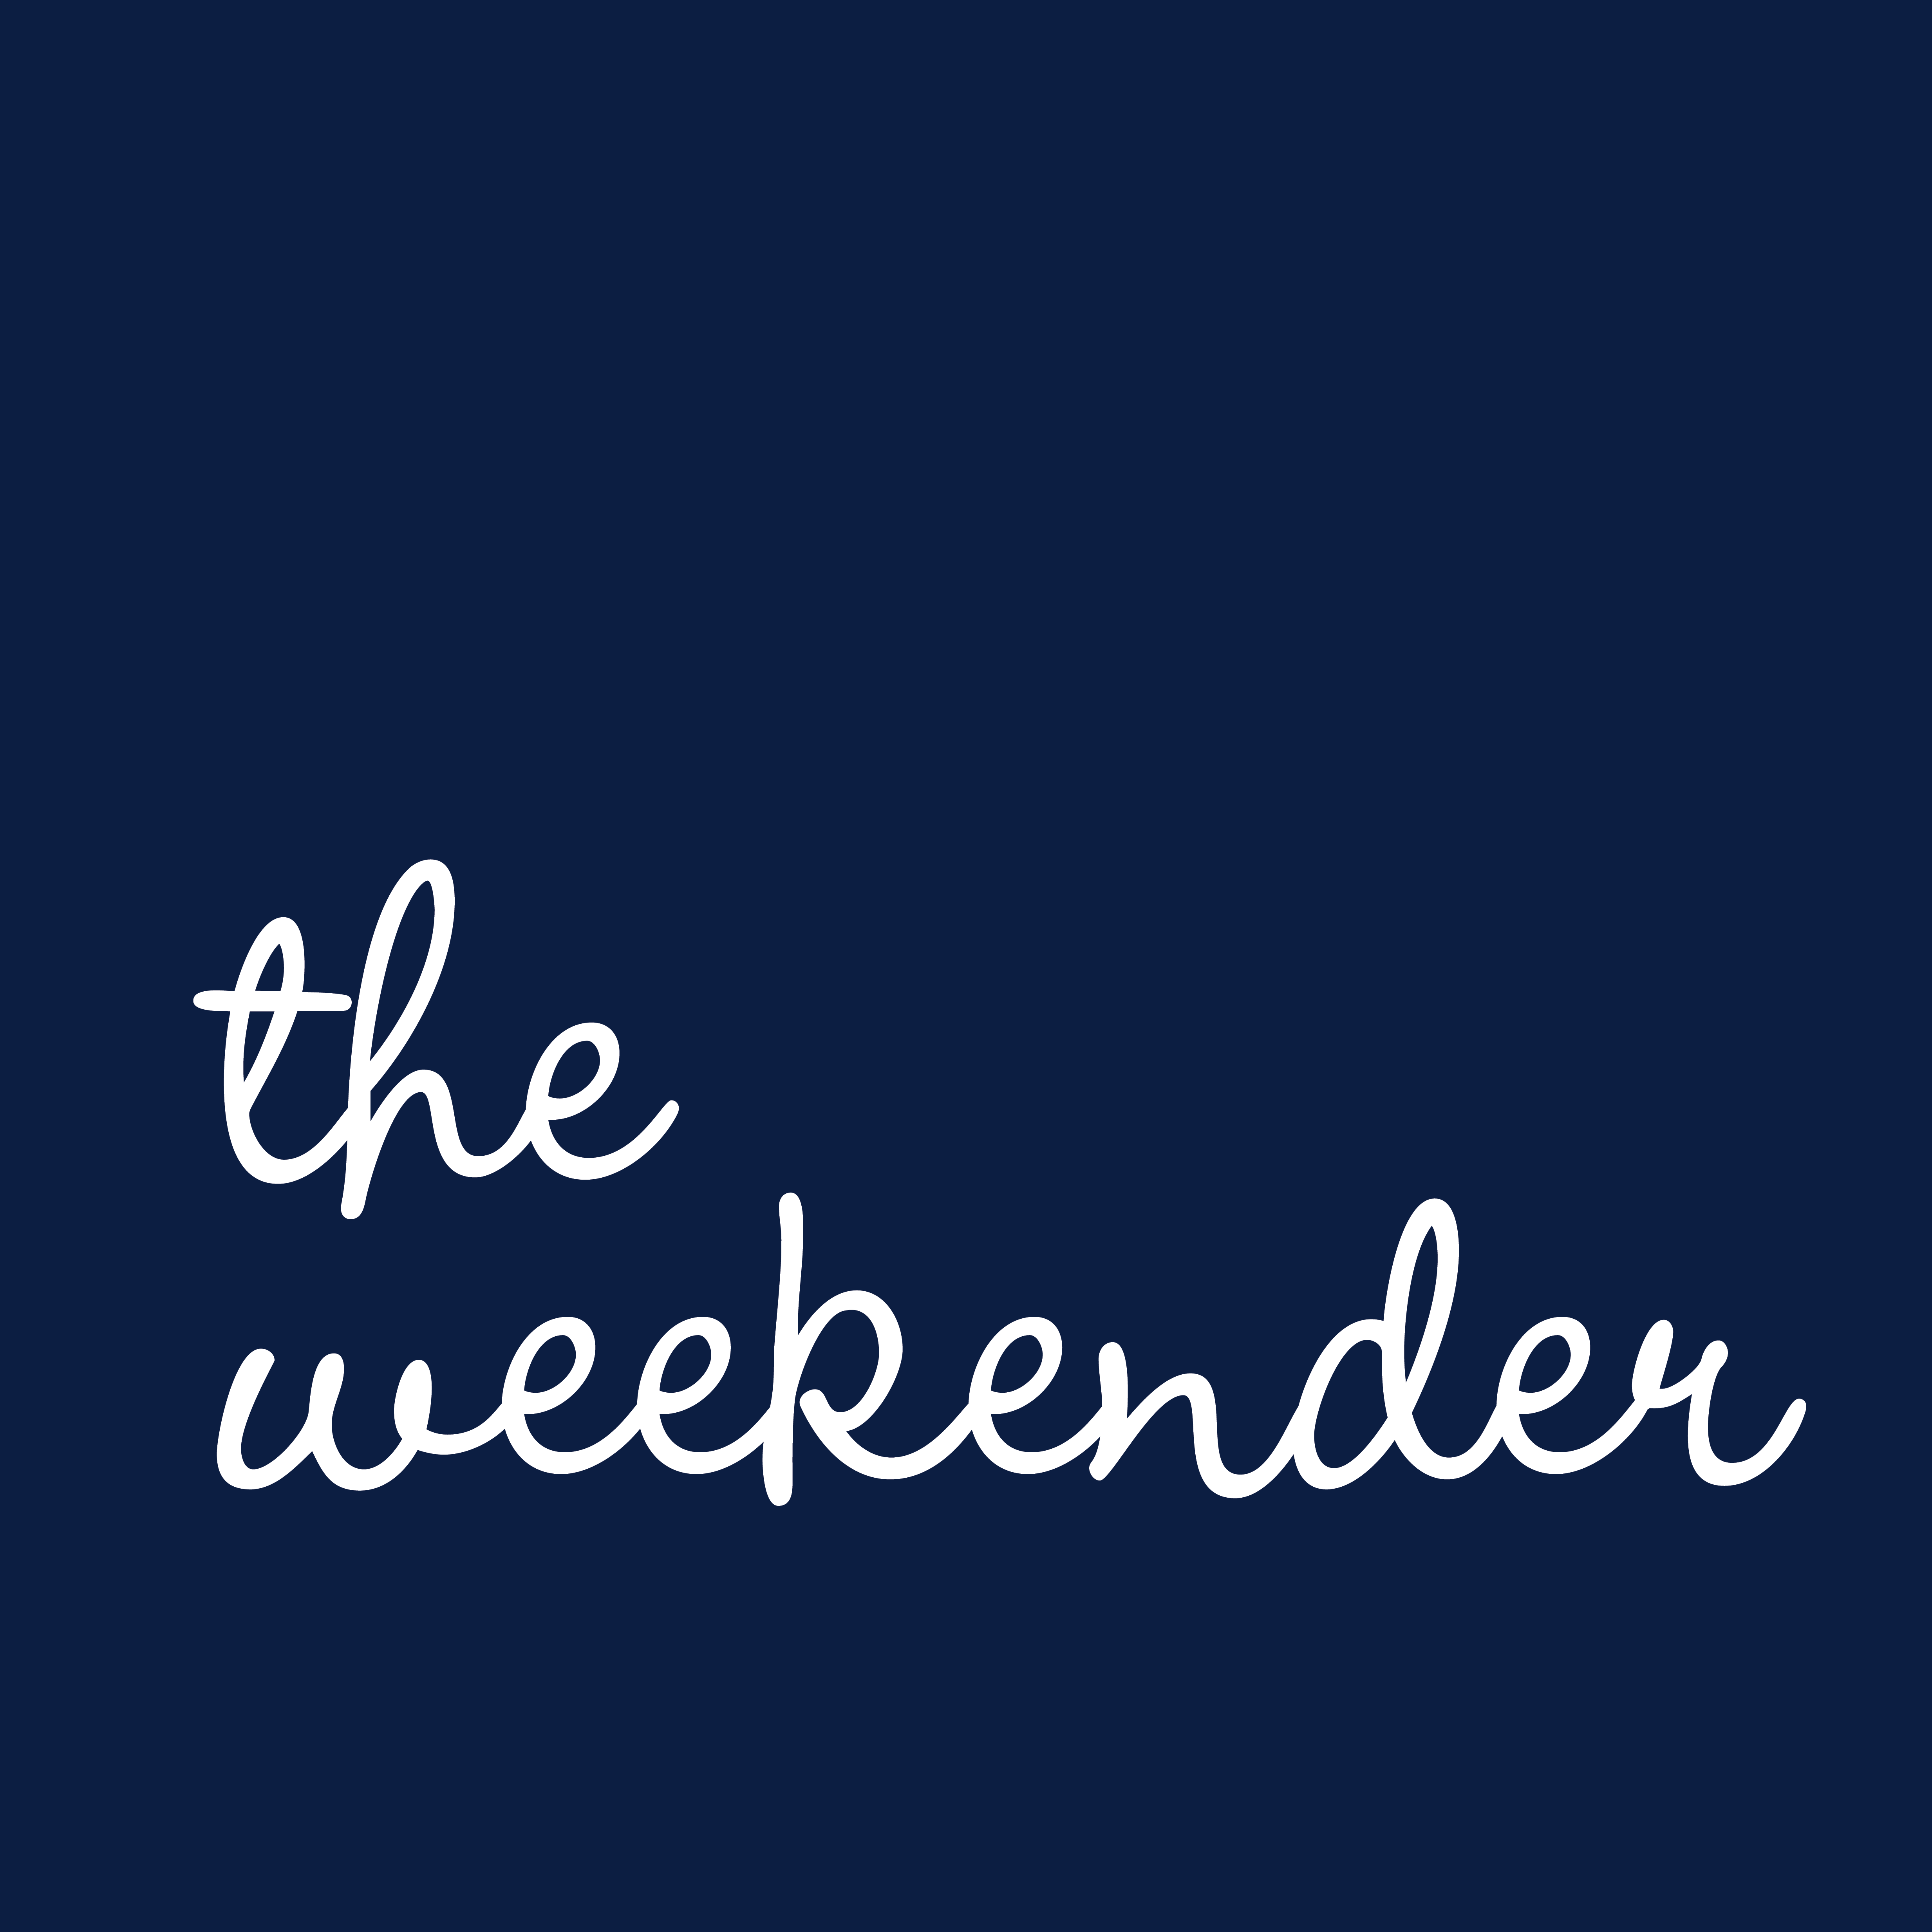 Product update: The Weekender! New seasonal tips to increase the value of your home.